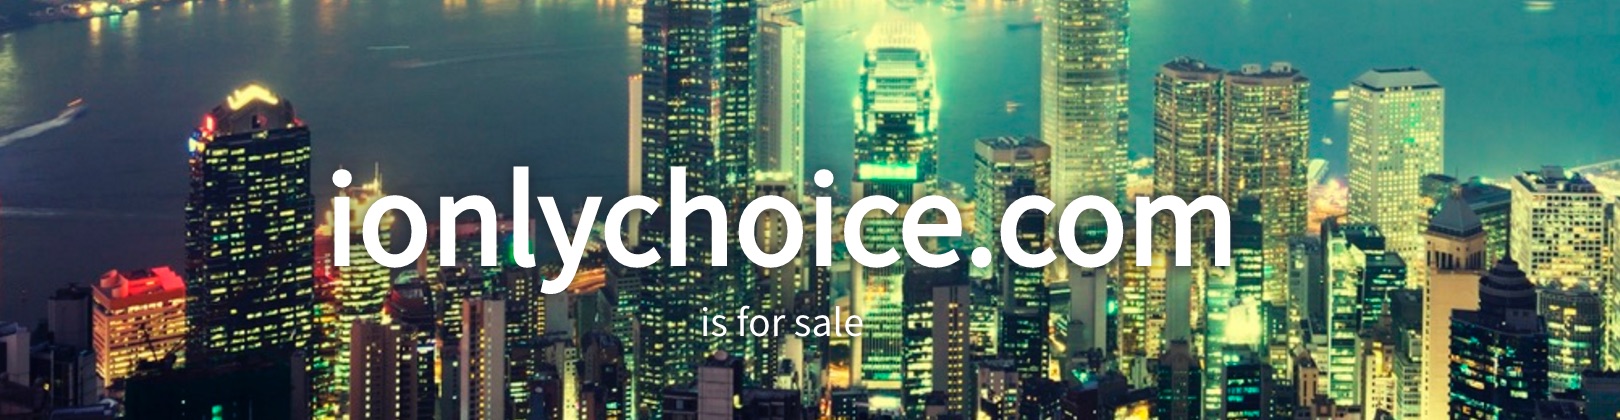 ionlychoice_com_is_available_for_purchase_-_sedo_com.jpg